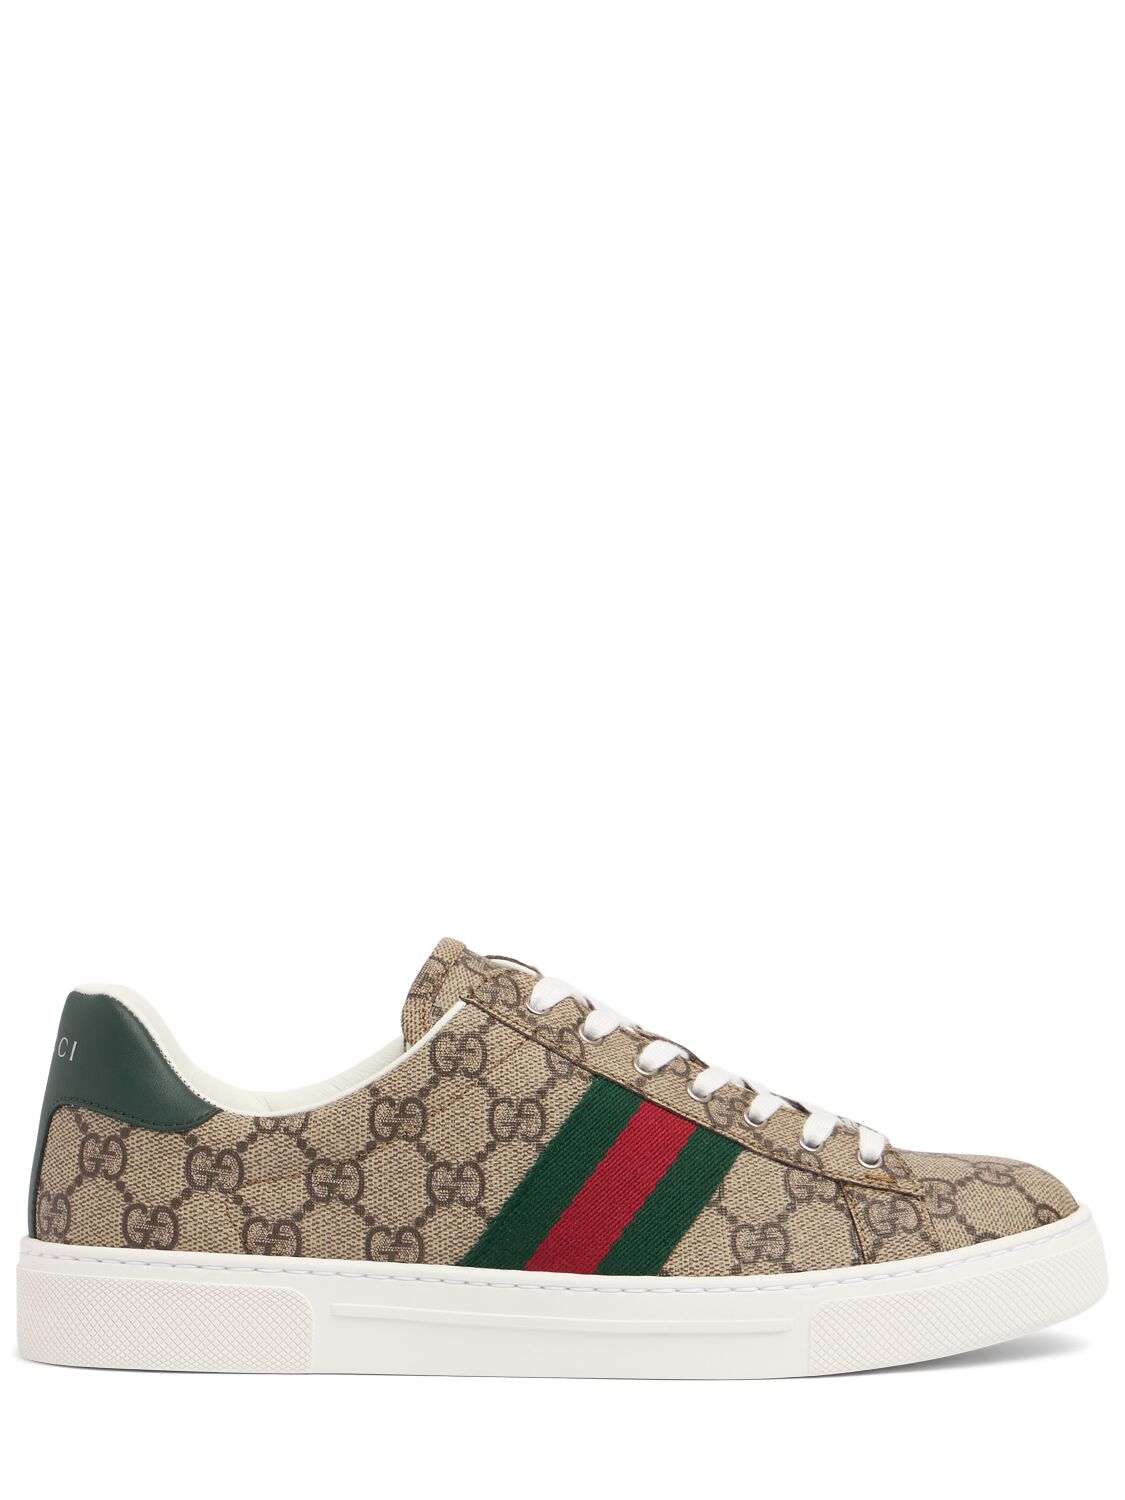 Gucci 30mm  Ace Canvas Trainer Sneakers In Ebony,green